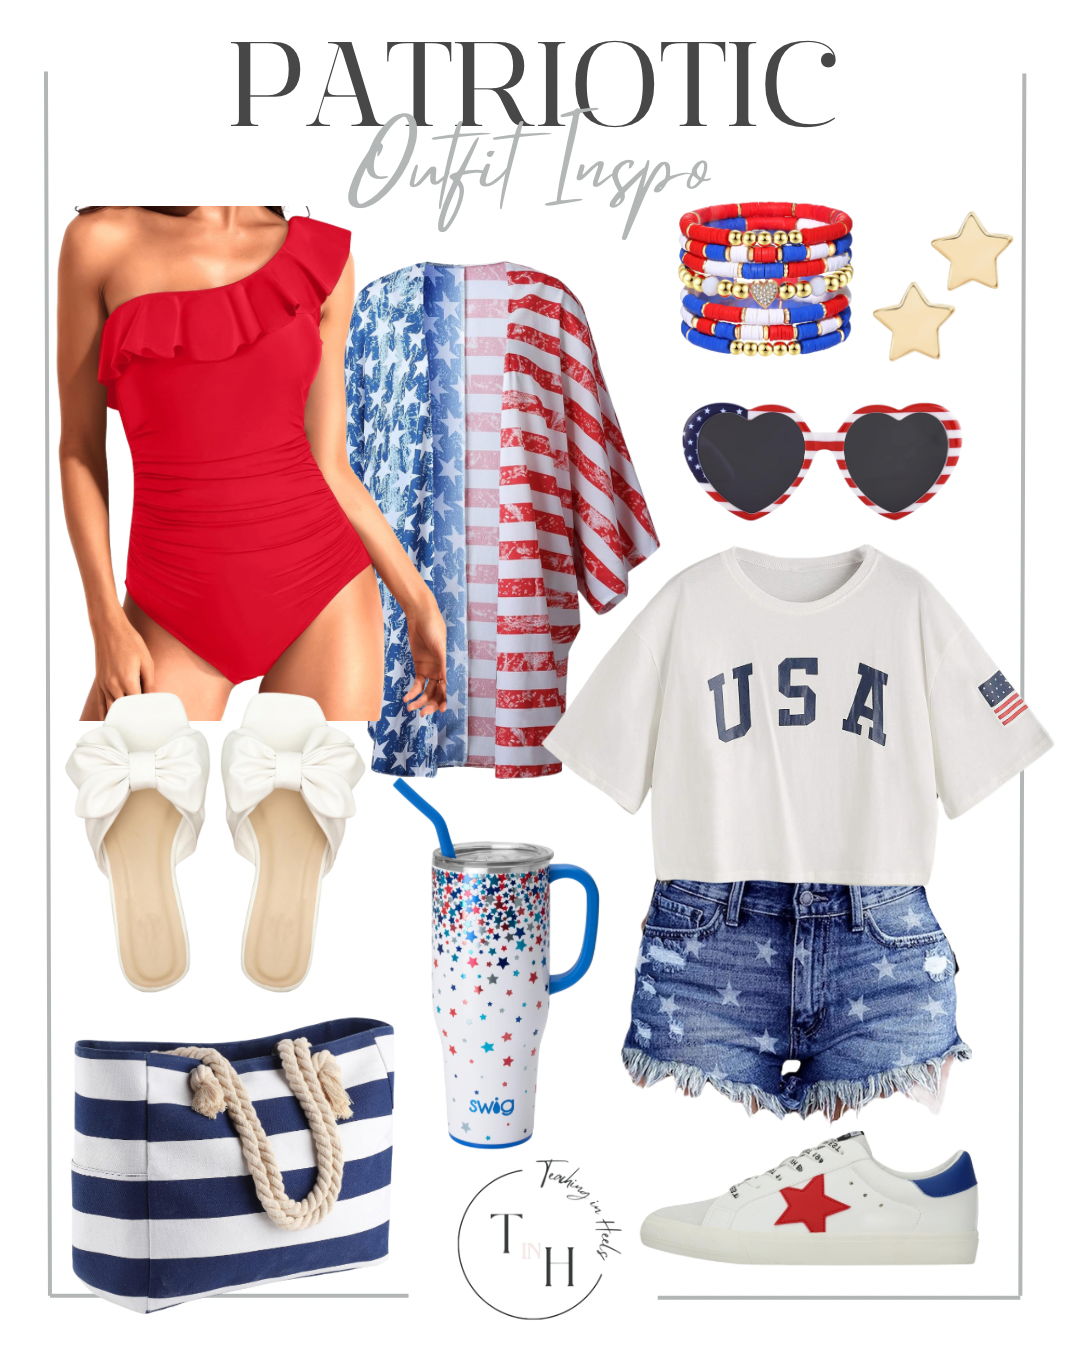 4th of July Style Guide: Must-Have Outfits & Essentials

fourth of july, summer, summer outfit, summer fashion, outdoor hosting, patriotic outfit, swimwear, party outfit, americana look, Amazon